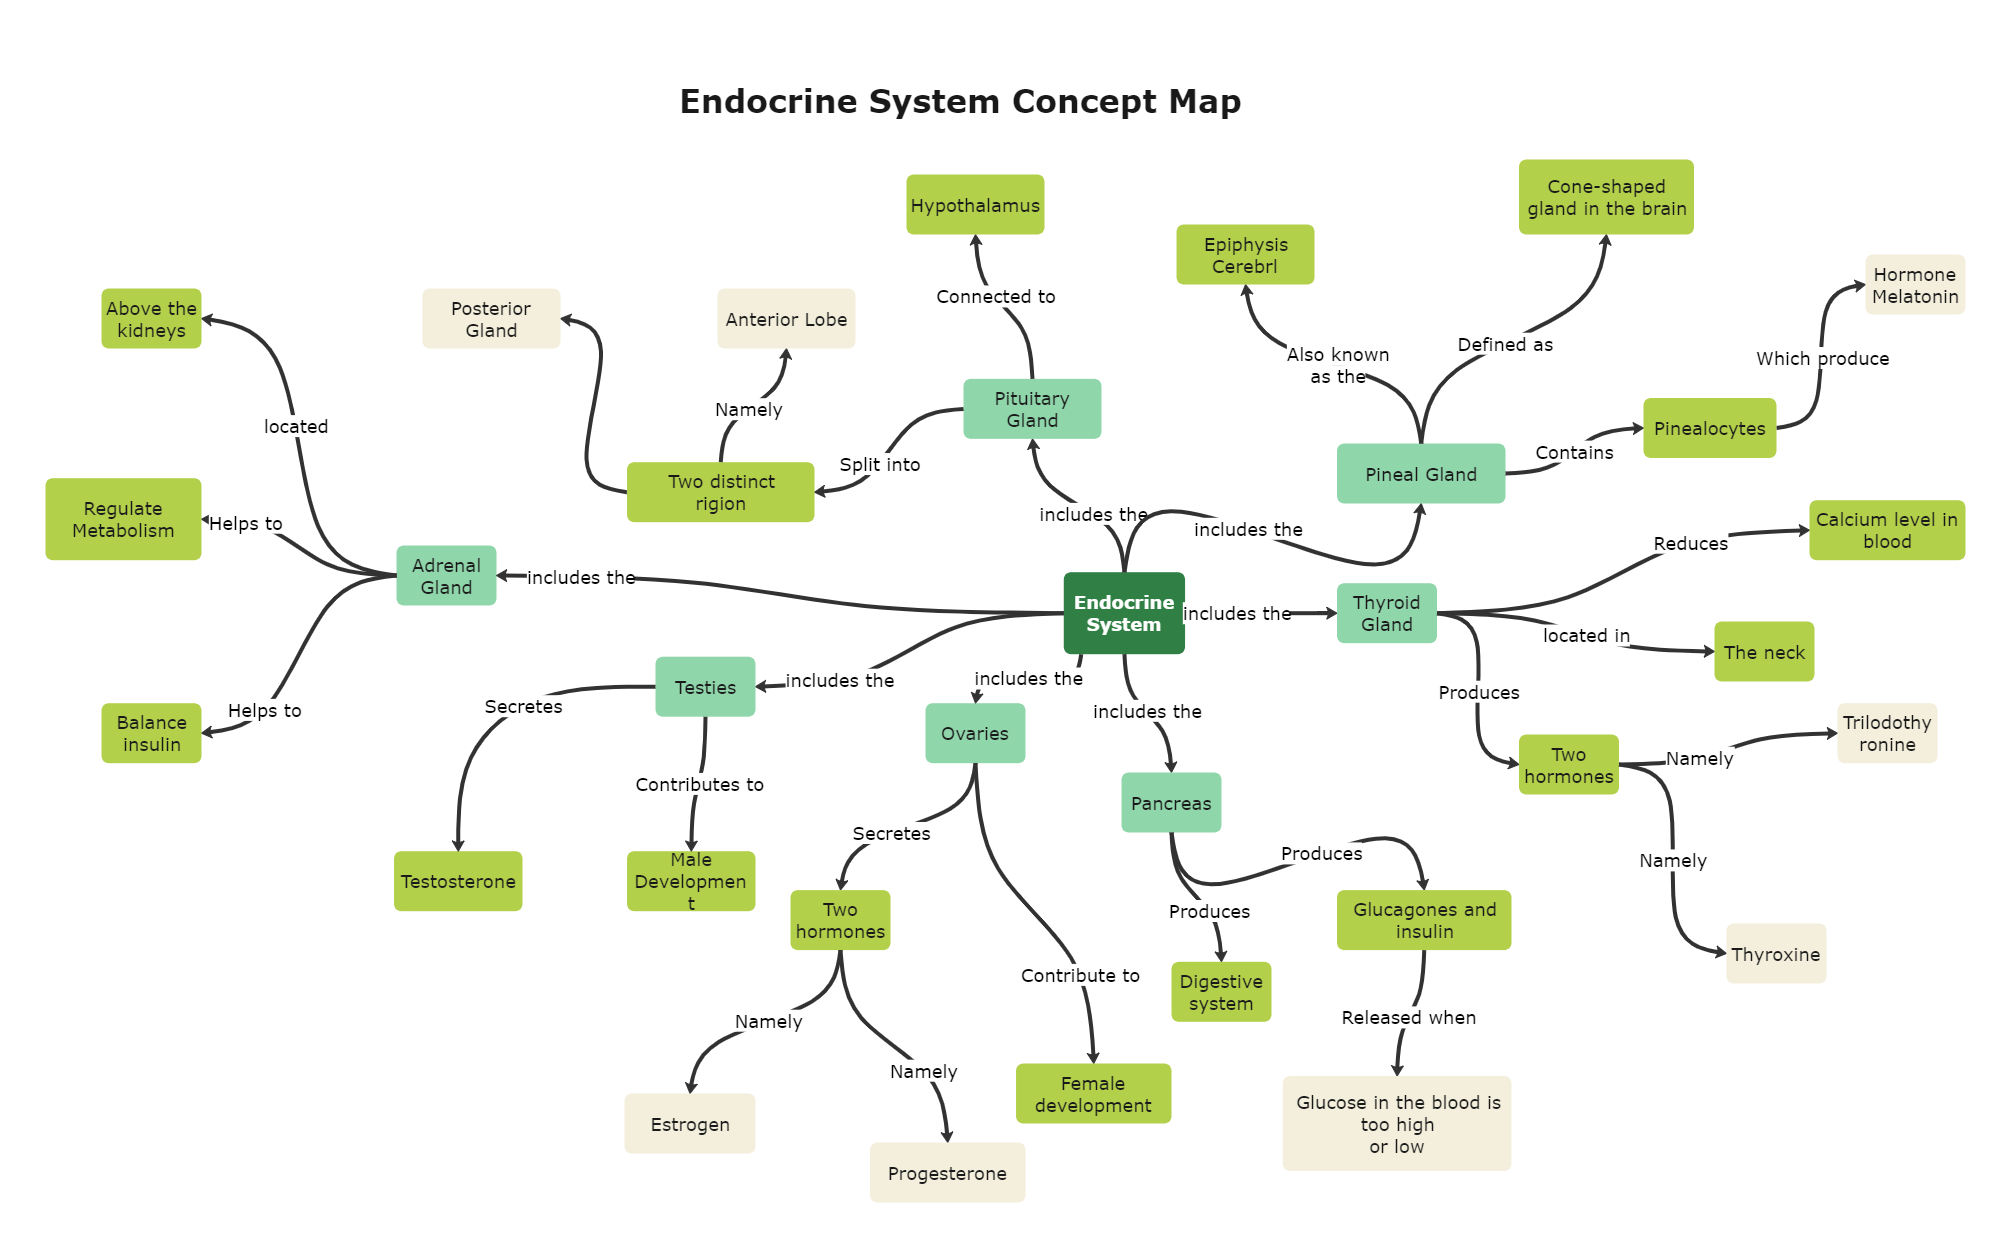 Endocrine System concept map helps students to organize the structures and functions of the system. An endocrine system concept map template includes glands that perform vital functions within a biological body.